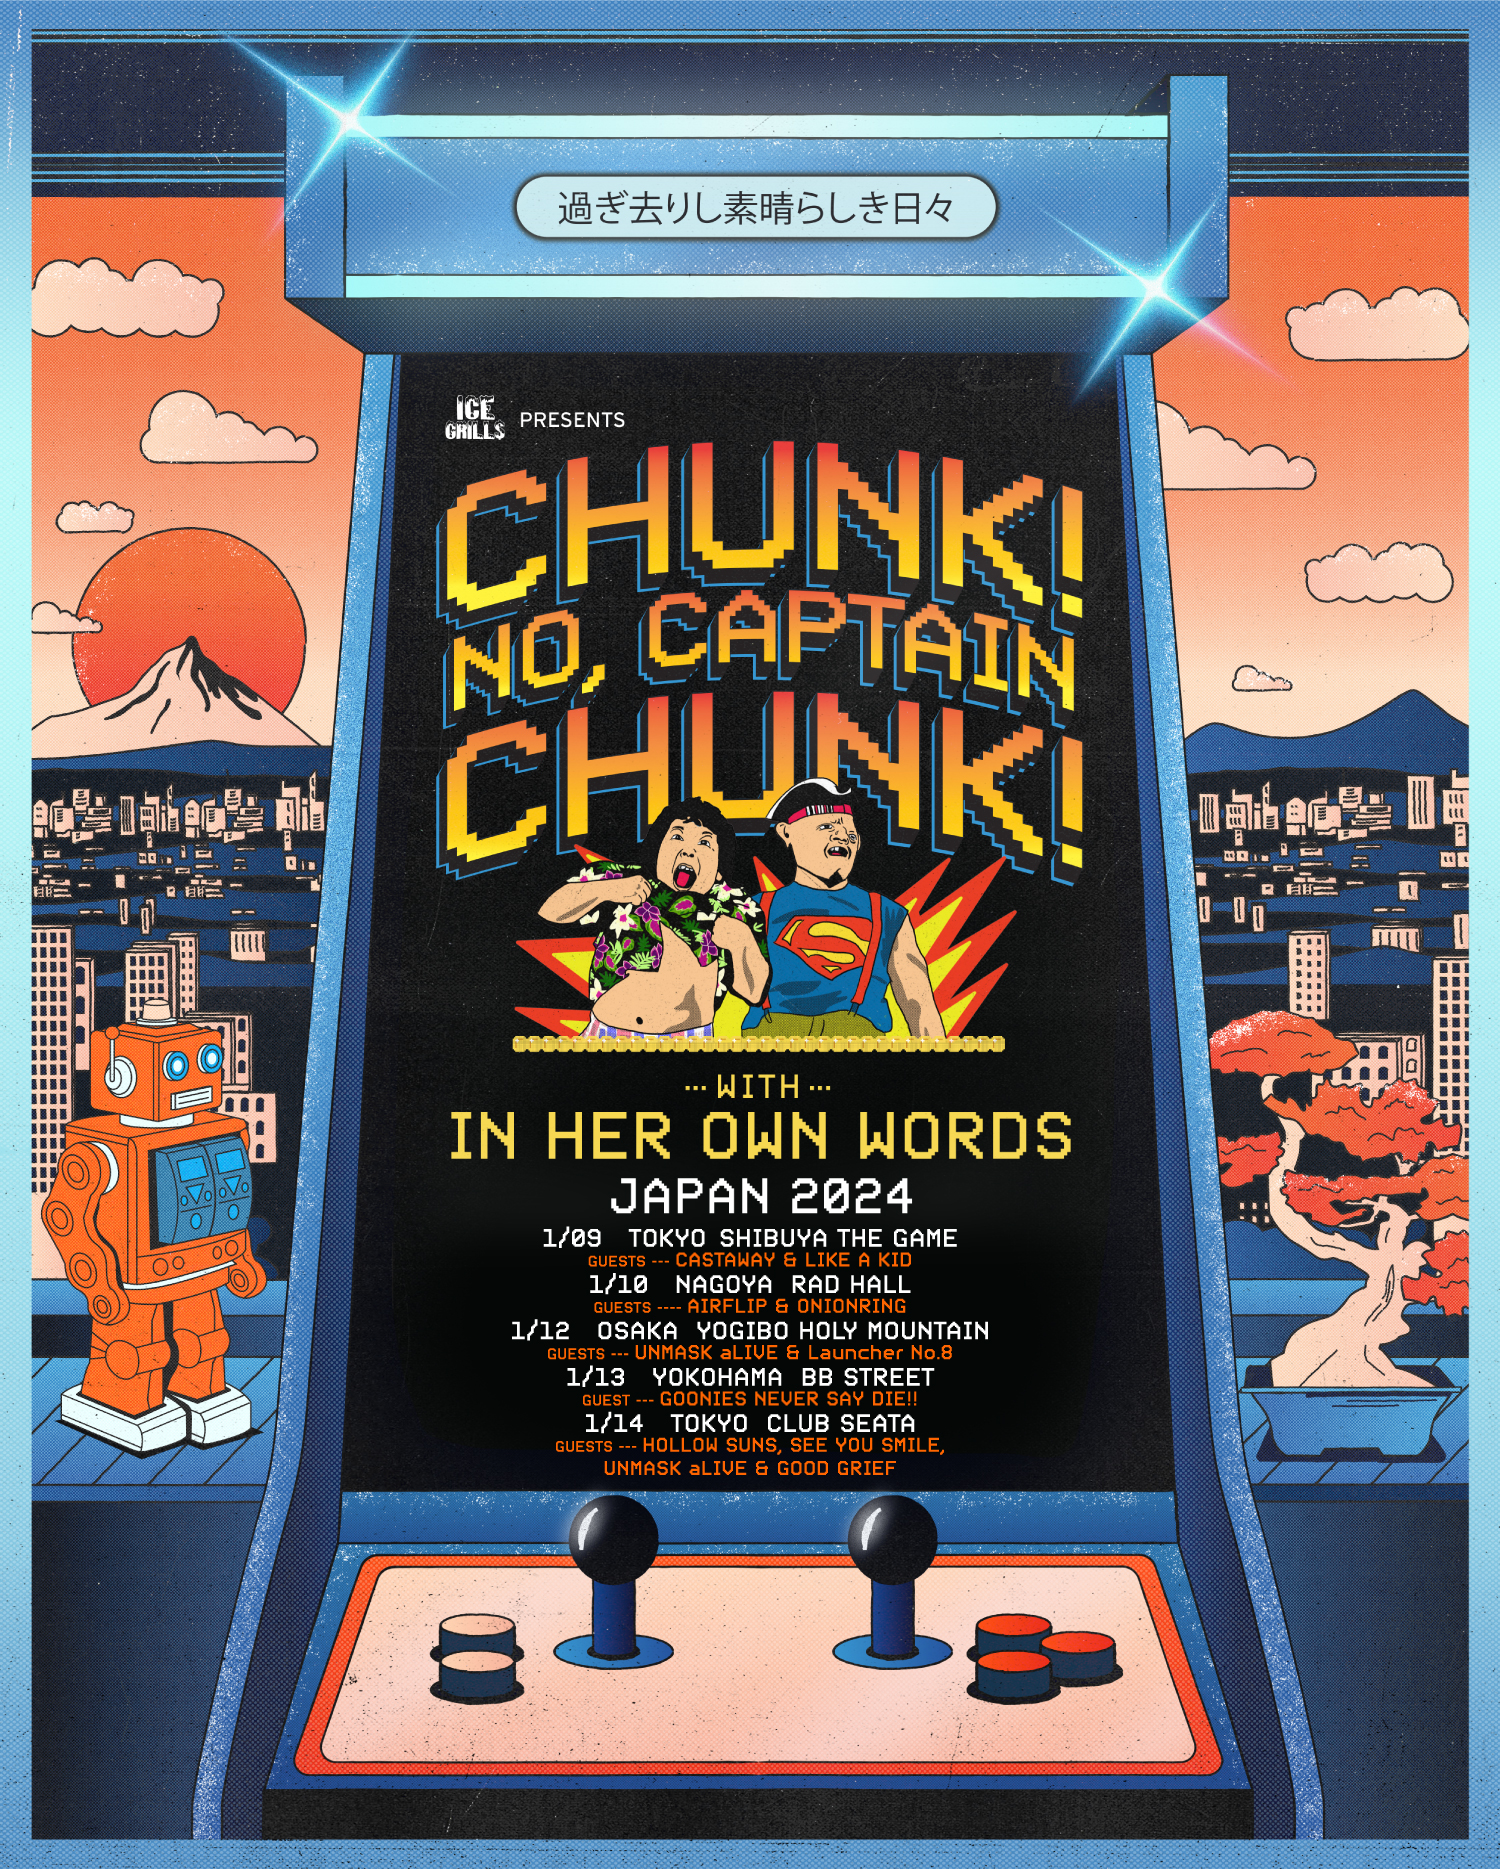 Chunk! No, Captain Chunk! with In Her Own Words guest bands announced